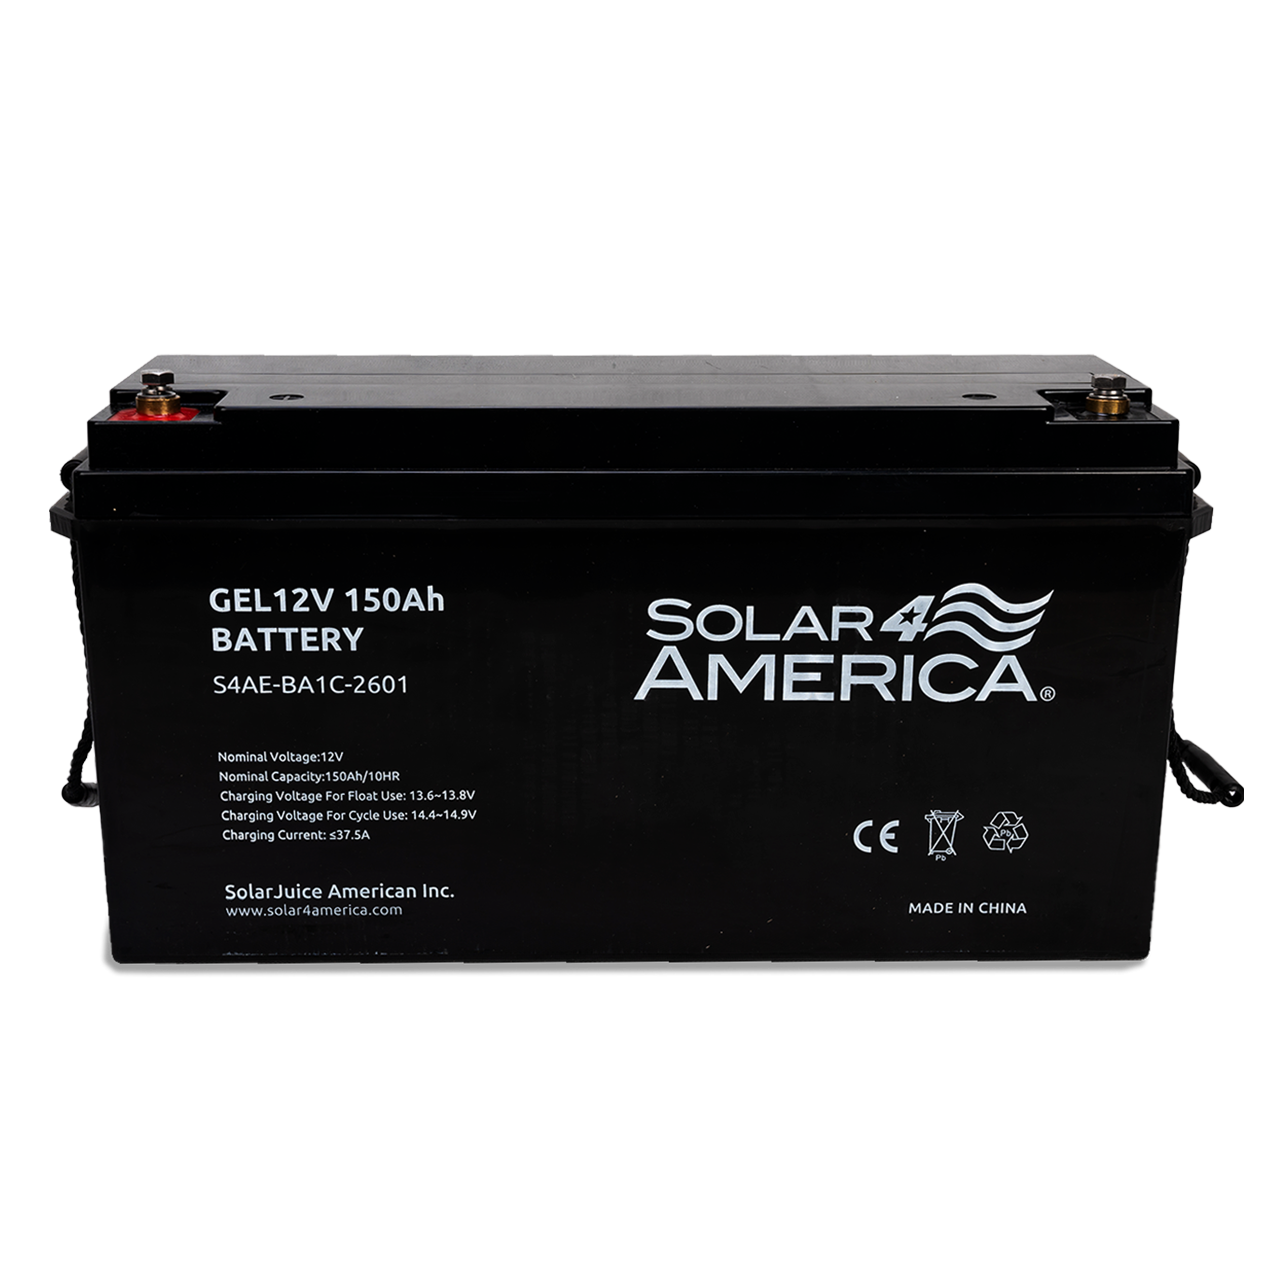 12V Deep Cycle Gel Battery, for Solar Wind Power Generator System, Includes Cables